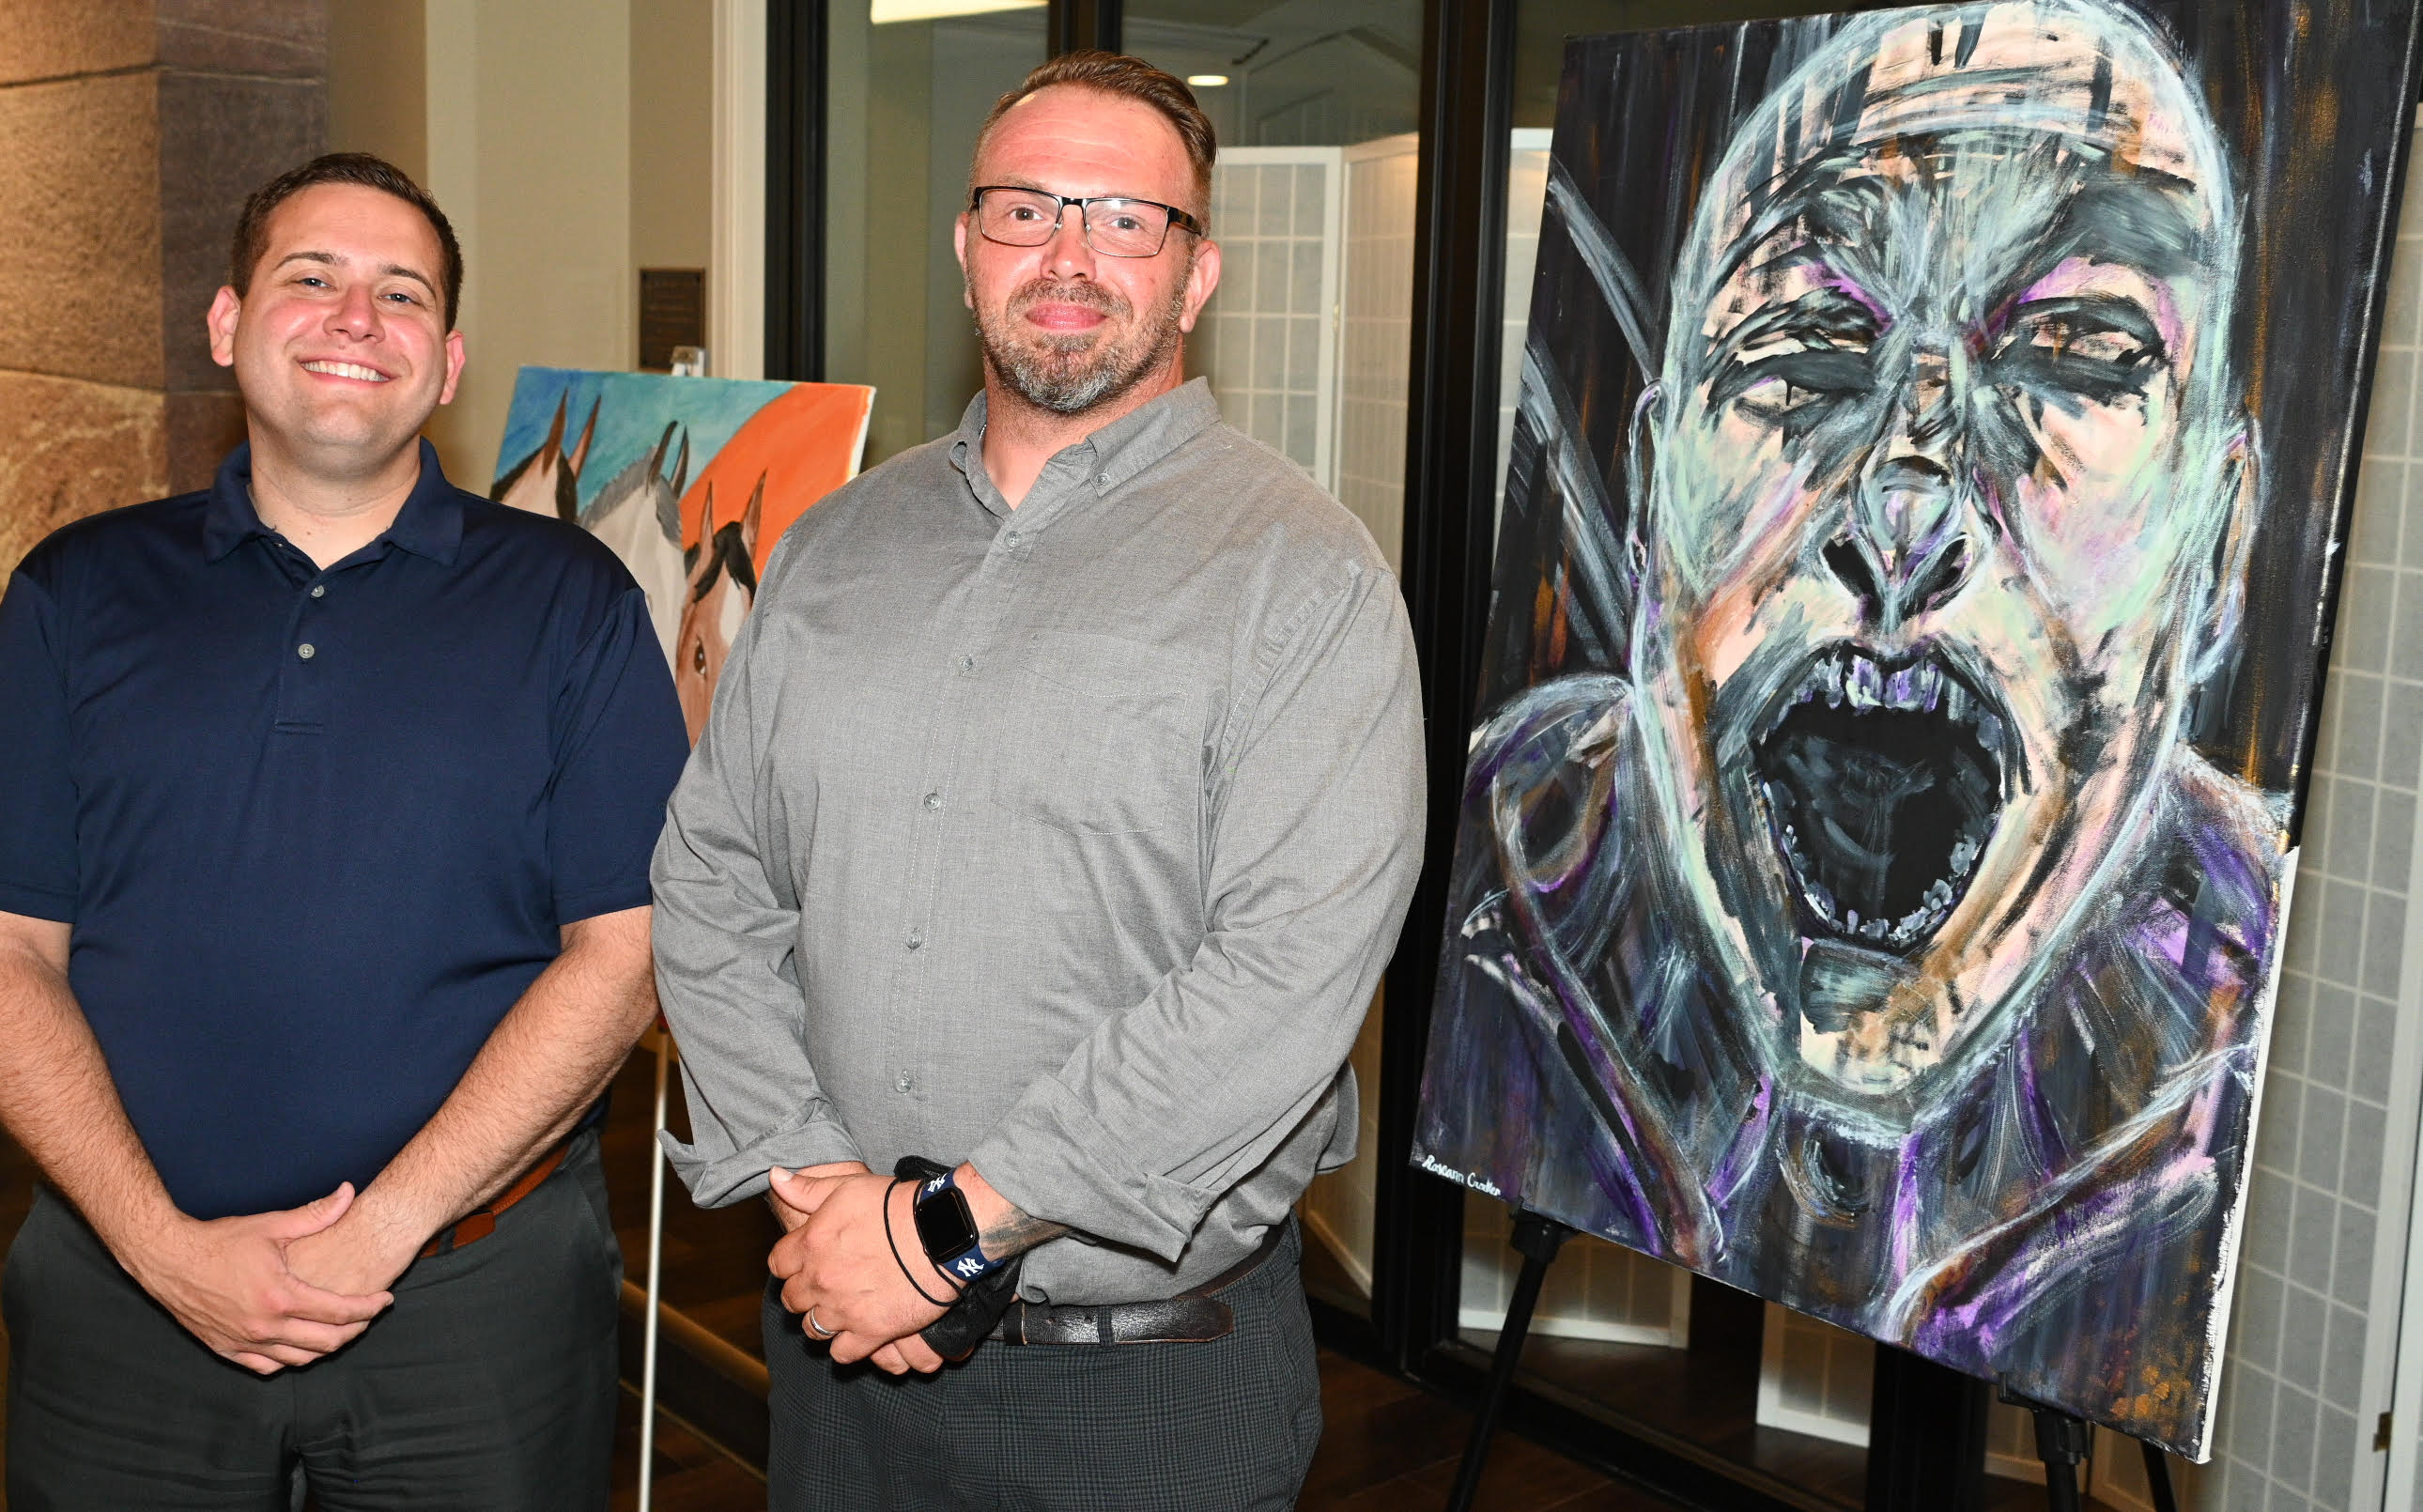 St. Luke’s Episcopal Church was the venue for the recent Art of Recovery exhibit presented by St. Luke’s and the Mental Health Association in Chautauqua County (MHA). One of the visitors, Jamestown Mayor Eddie Sundquist (left), is pictured with MHA staffer Sean Jones beside the painting “Francis Bacon Study” by Roseann Crocke.